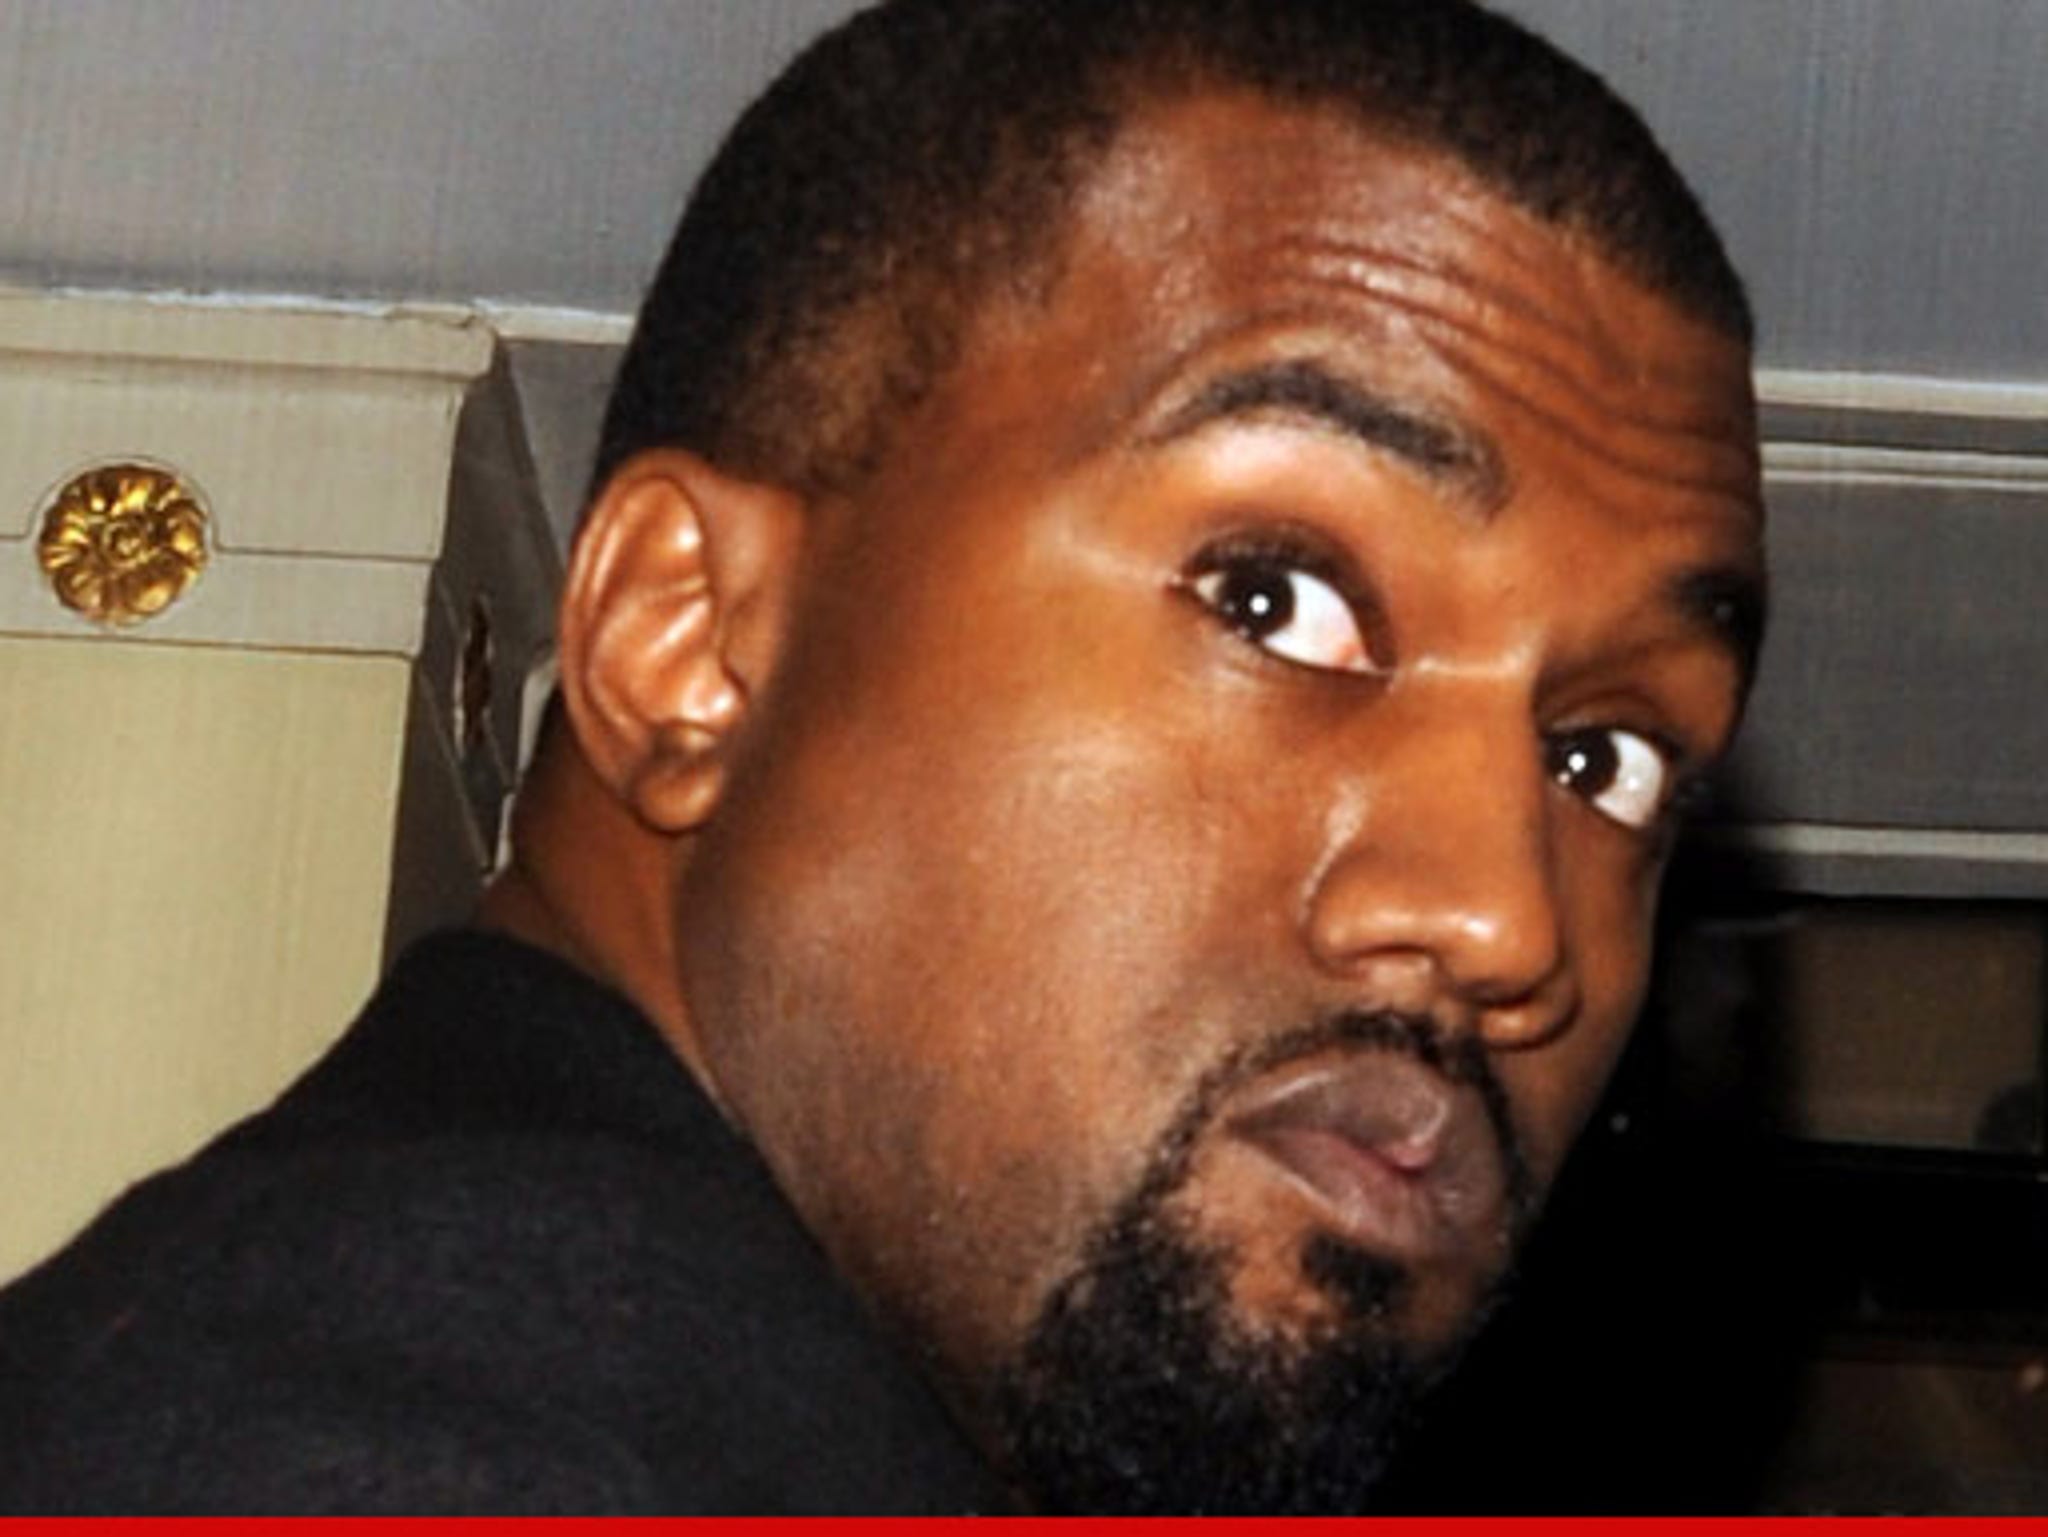 Kanye West Hit With RICO Lawsuit for 'Gold Digger' Sample